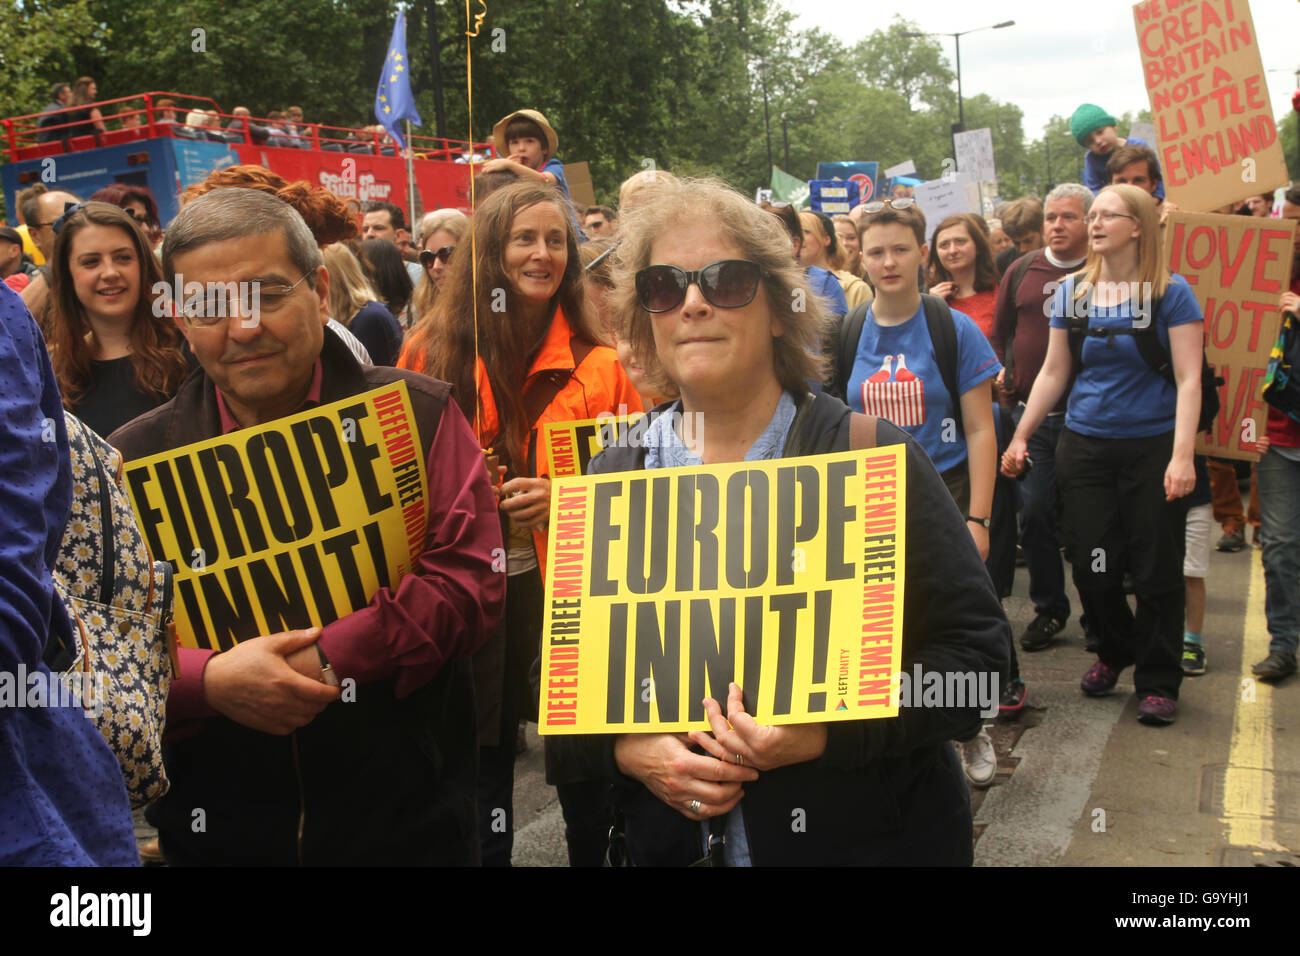 London, UK. 02nd July, 2016. LONDON, UK - JULY 2: Thousands of pro EU supporters in London take part in the March For Europe demonstration a week after the Brexit Referendum vote. The pro EU supporters march from Hyde Park to parliament Square.Photo: David Mbiyu/ Alamy New Live Stock Photo